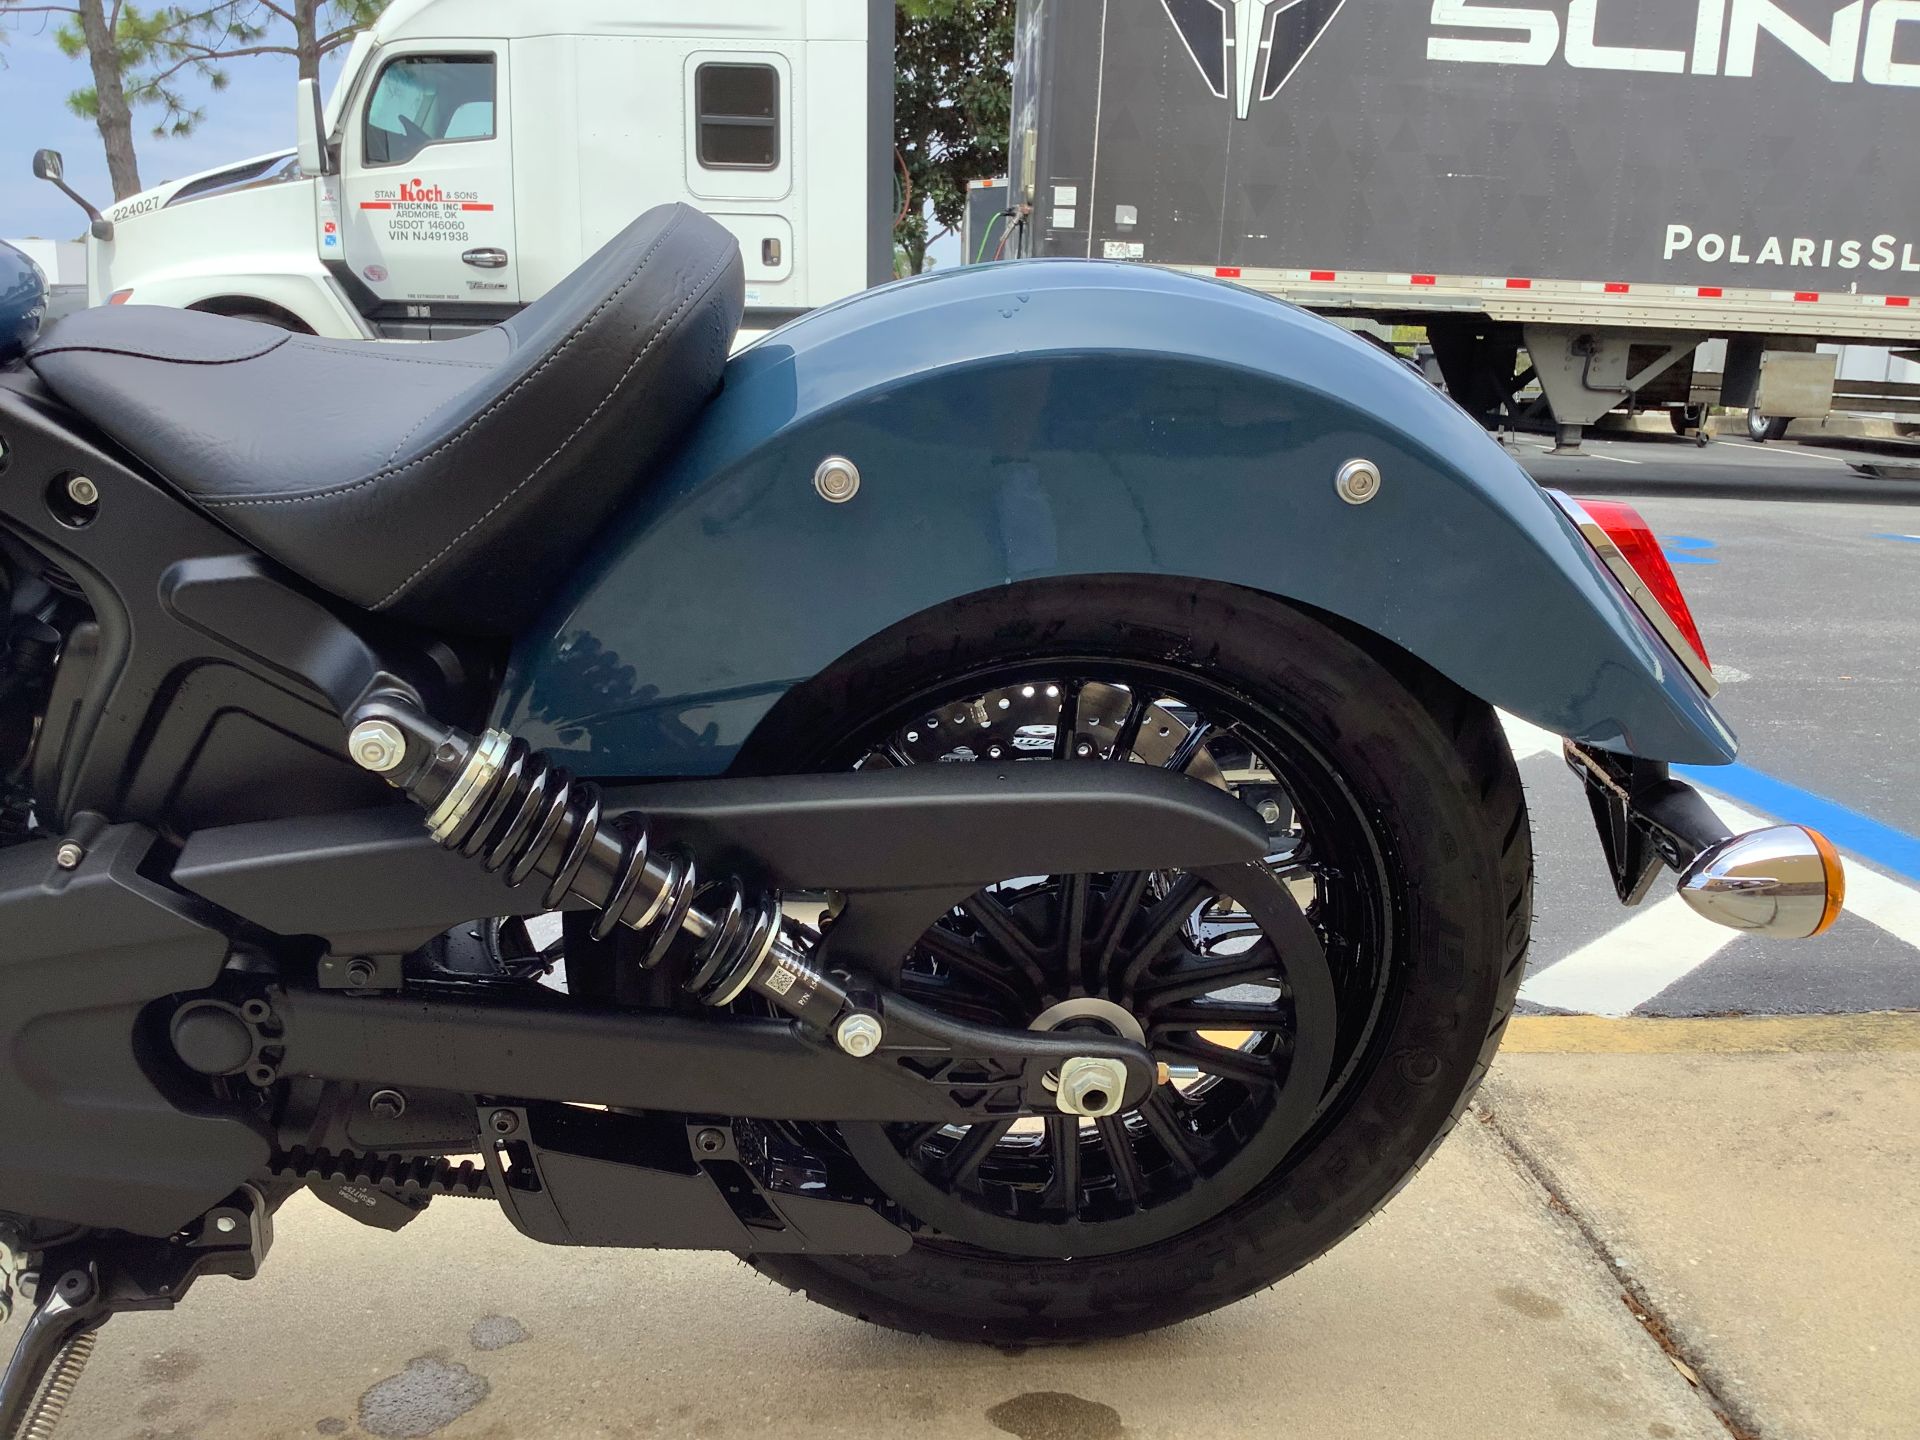 2022 Indian SCOUT 60 in Panama City Beach, Florida - Photo 9